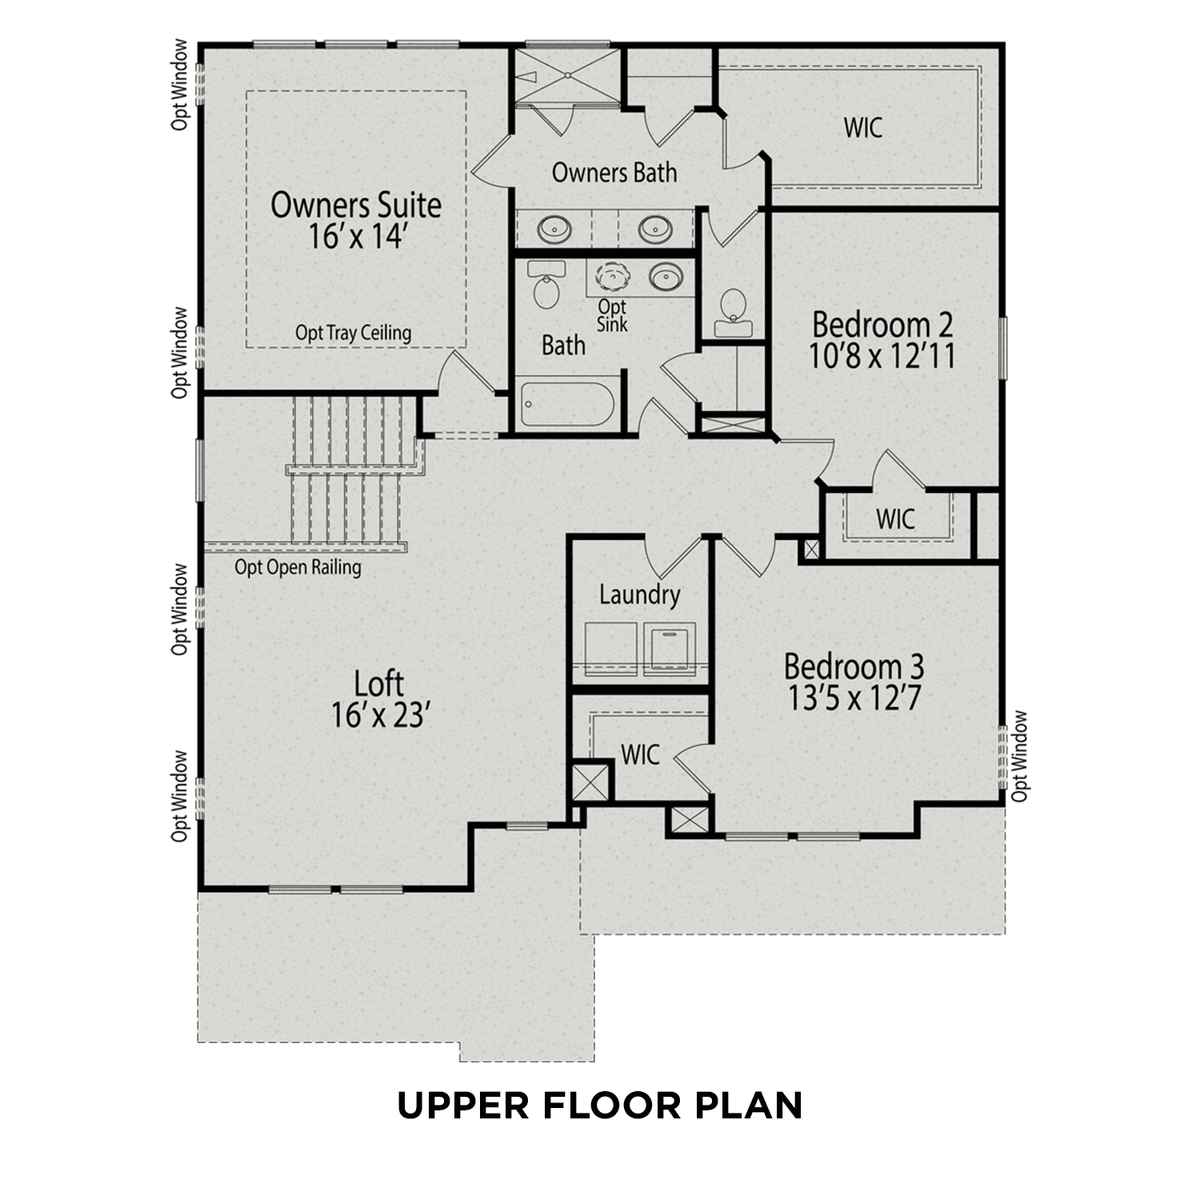 2 - The Chestnut E floor plan layout for 516 Craftsman Ridge Trail in Davidson Homes' Glenmere community.